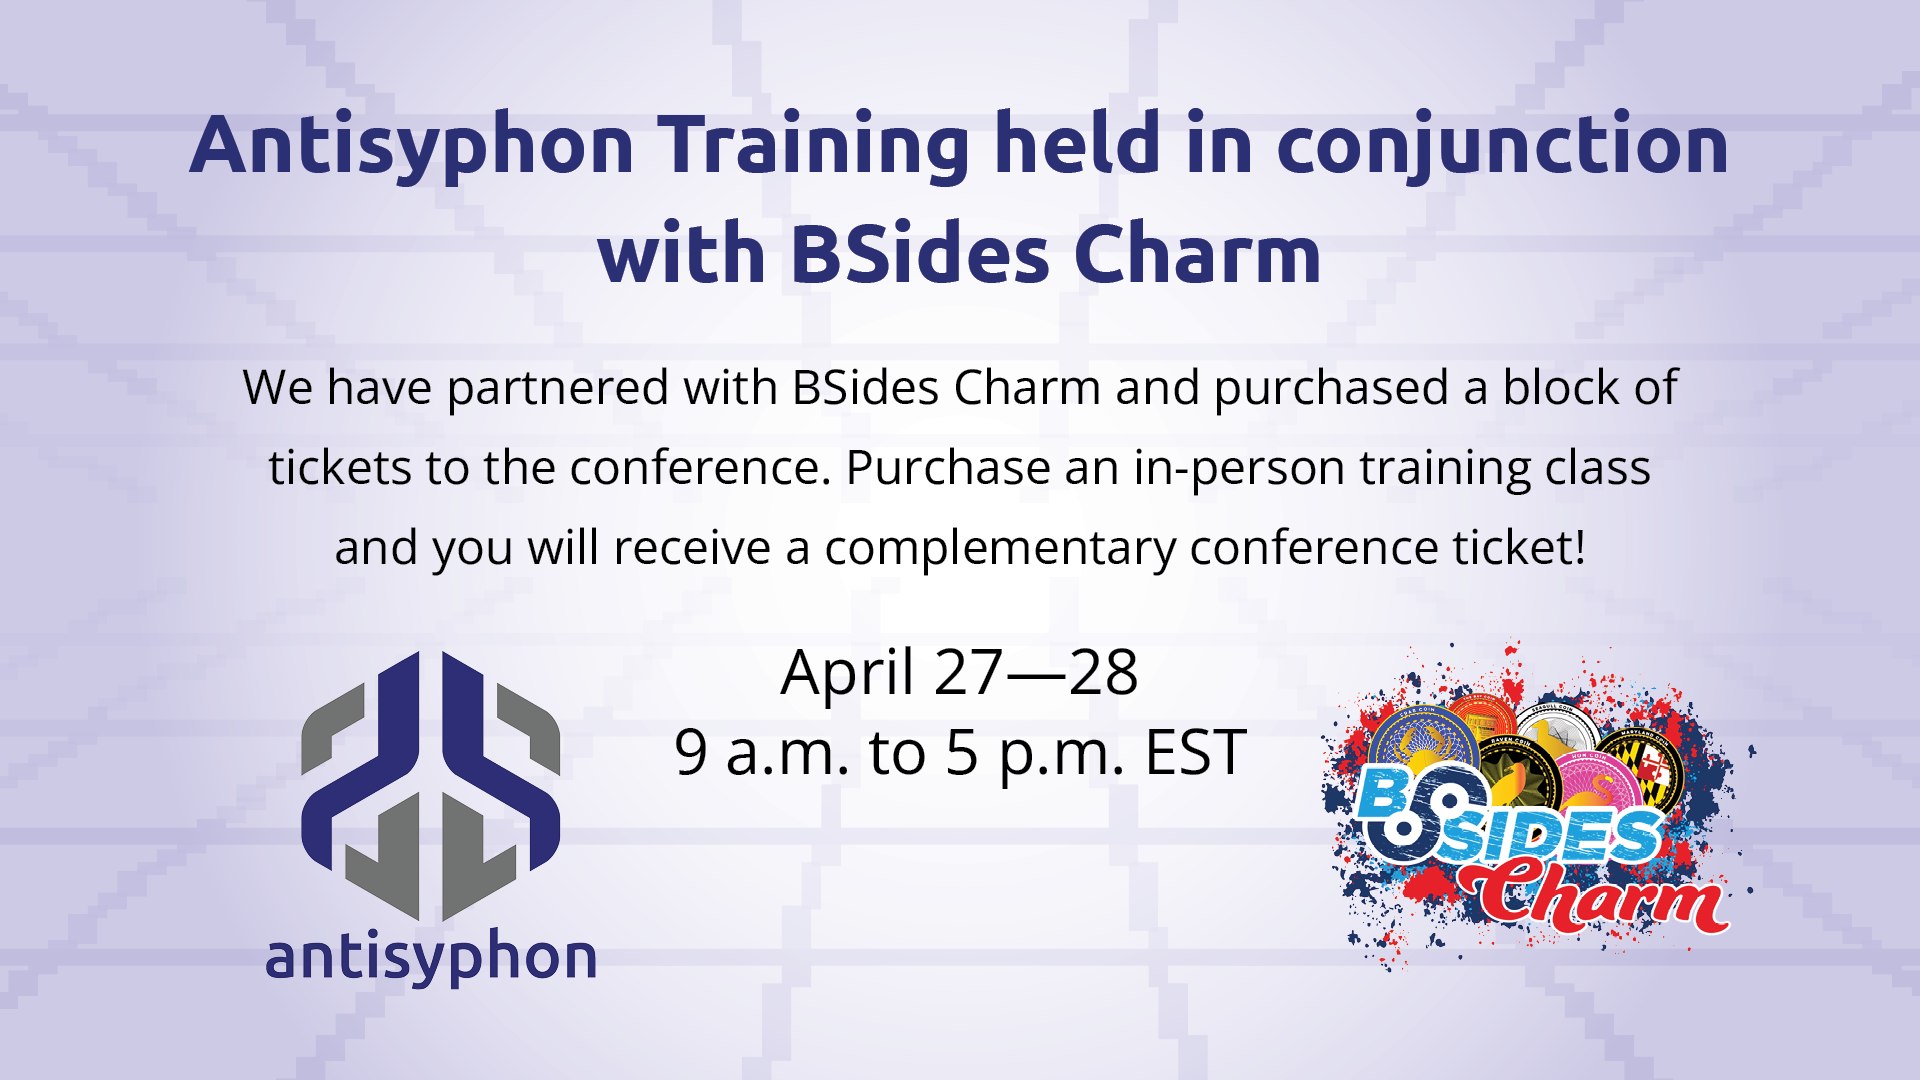 We have partnered with BSides Charm and purchased a block of tickets to the conference. Purchase an in-person training class and you will receive a complementary conference ticket.